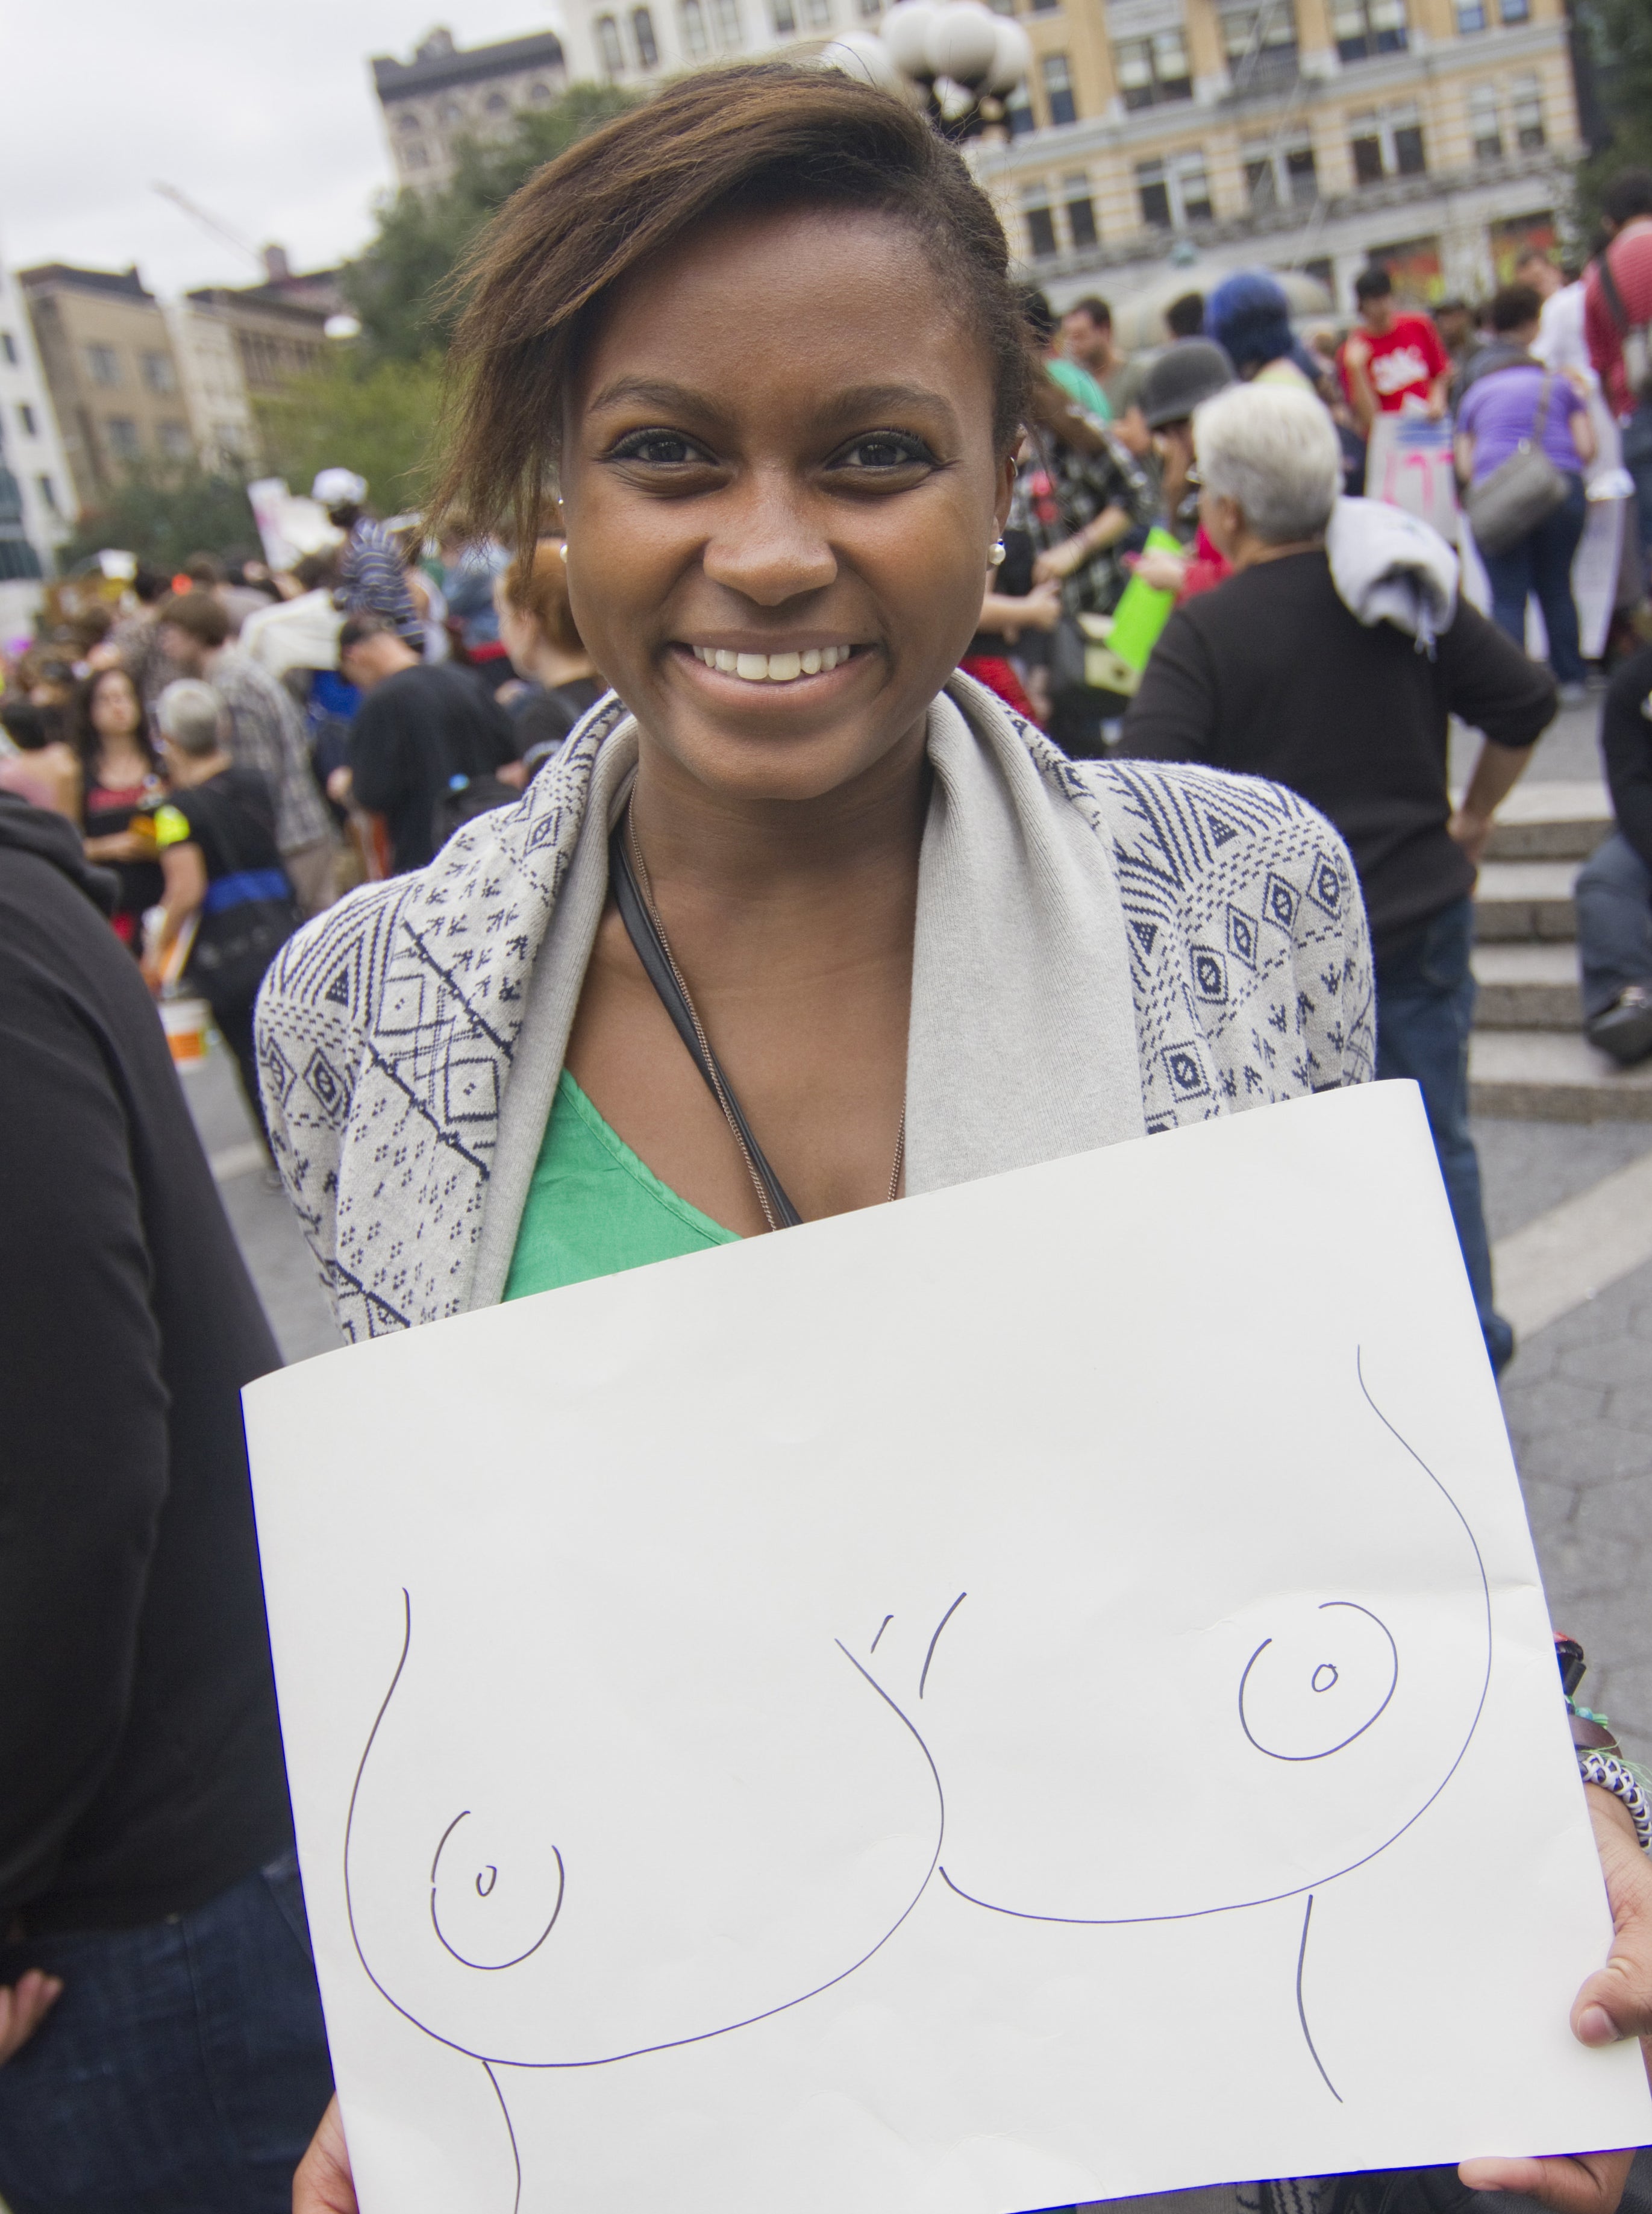 A woman with a sign depicting breasts participates in SlutWalk NYC, rallying in Union Square and marching through the East Village